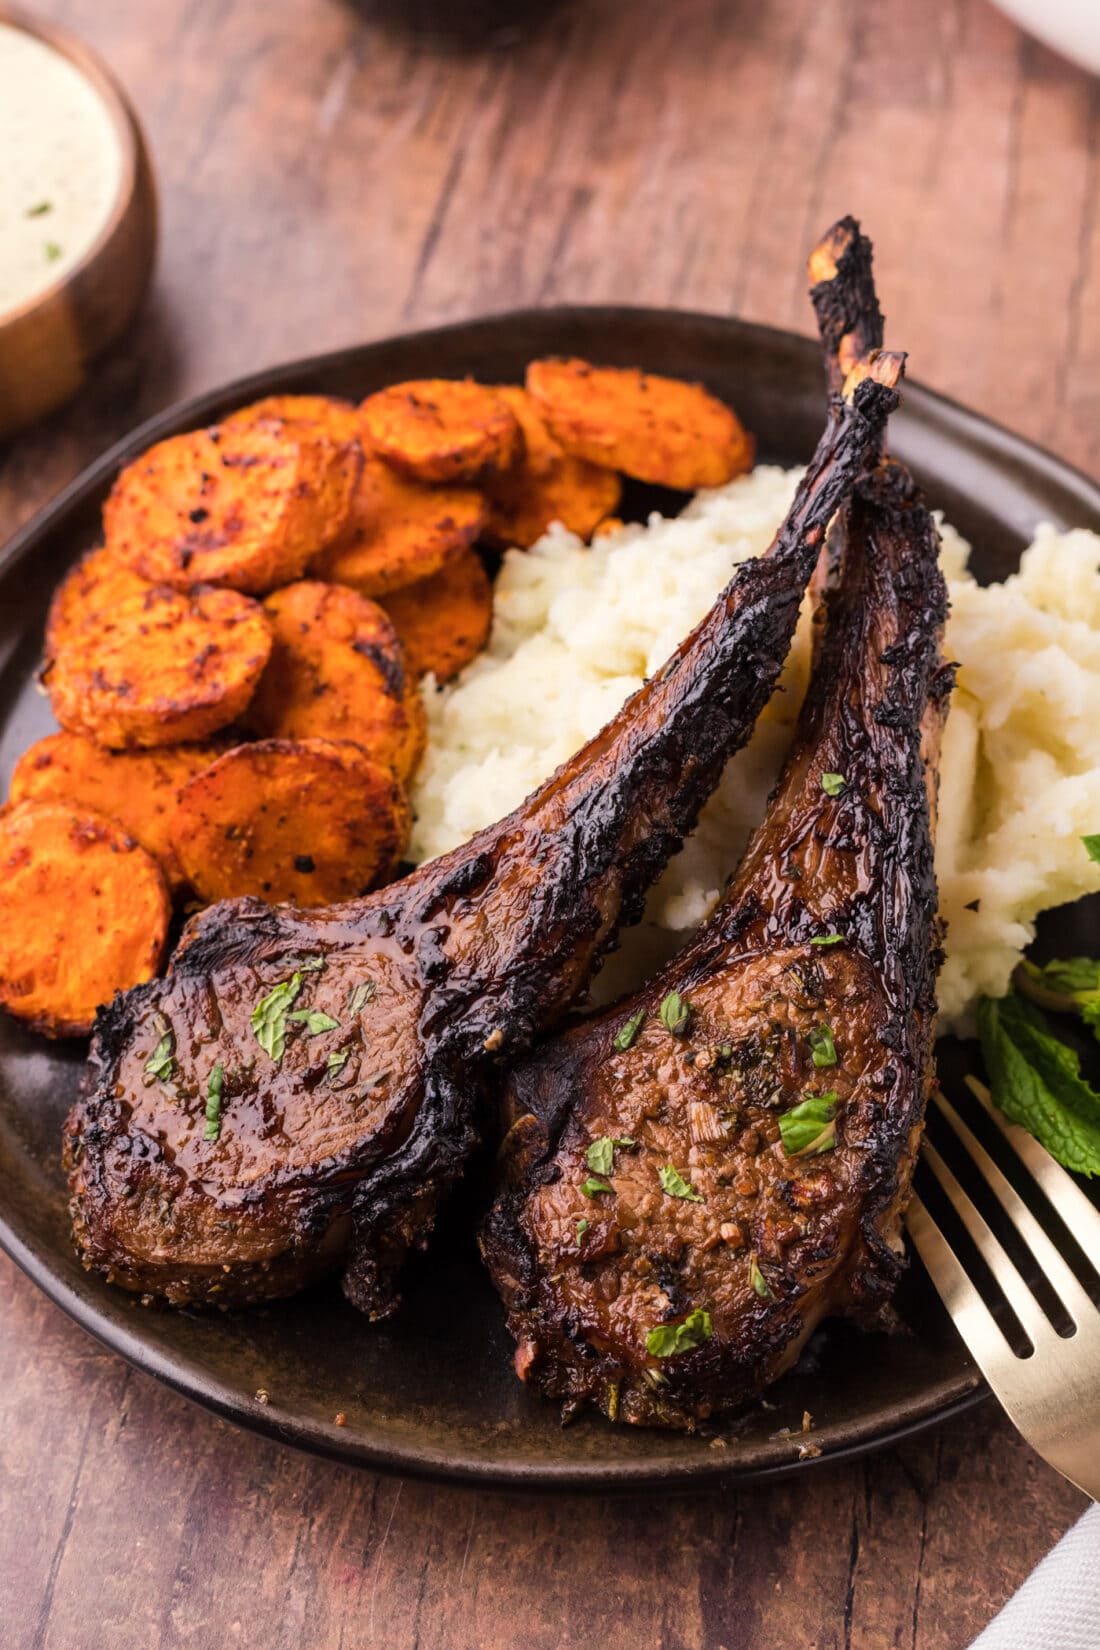 Two Broiled Lamb Chops on a plate with carrots and mashed potatoes